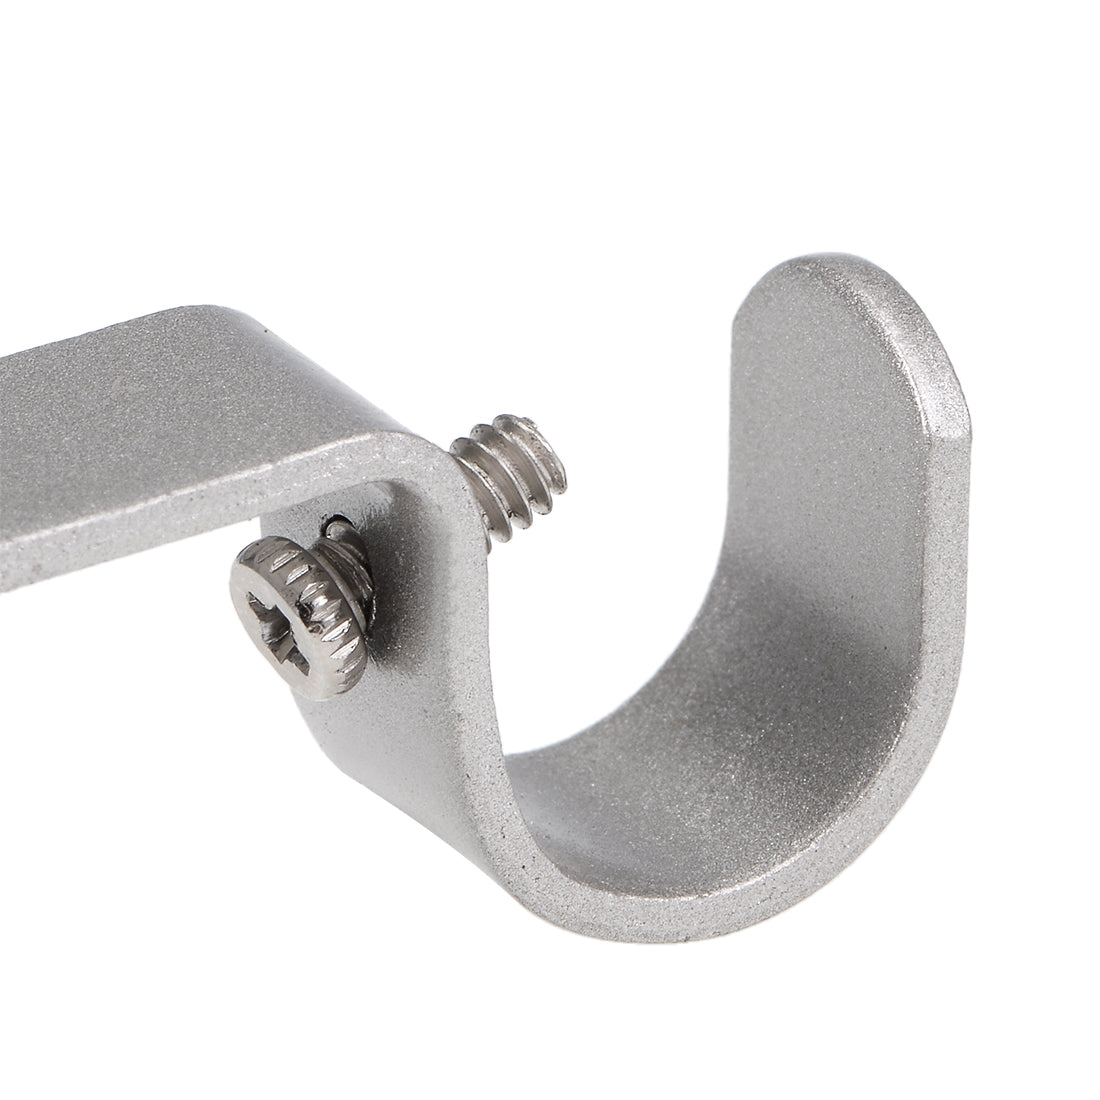 uxcell Uxcell Curtain Rod Bracket Iron Single Holder Support for 20mm Drapery Rod, 100 x 40 x 16mm Silver Tone 2Pcs